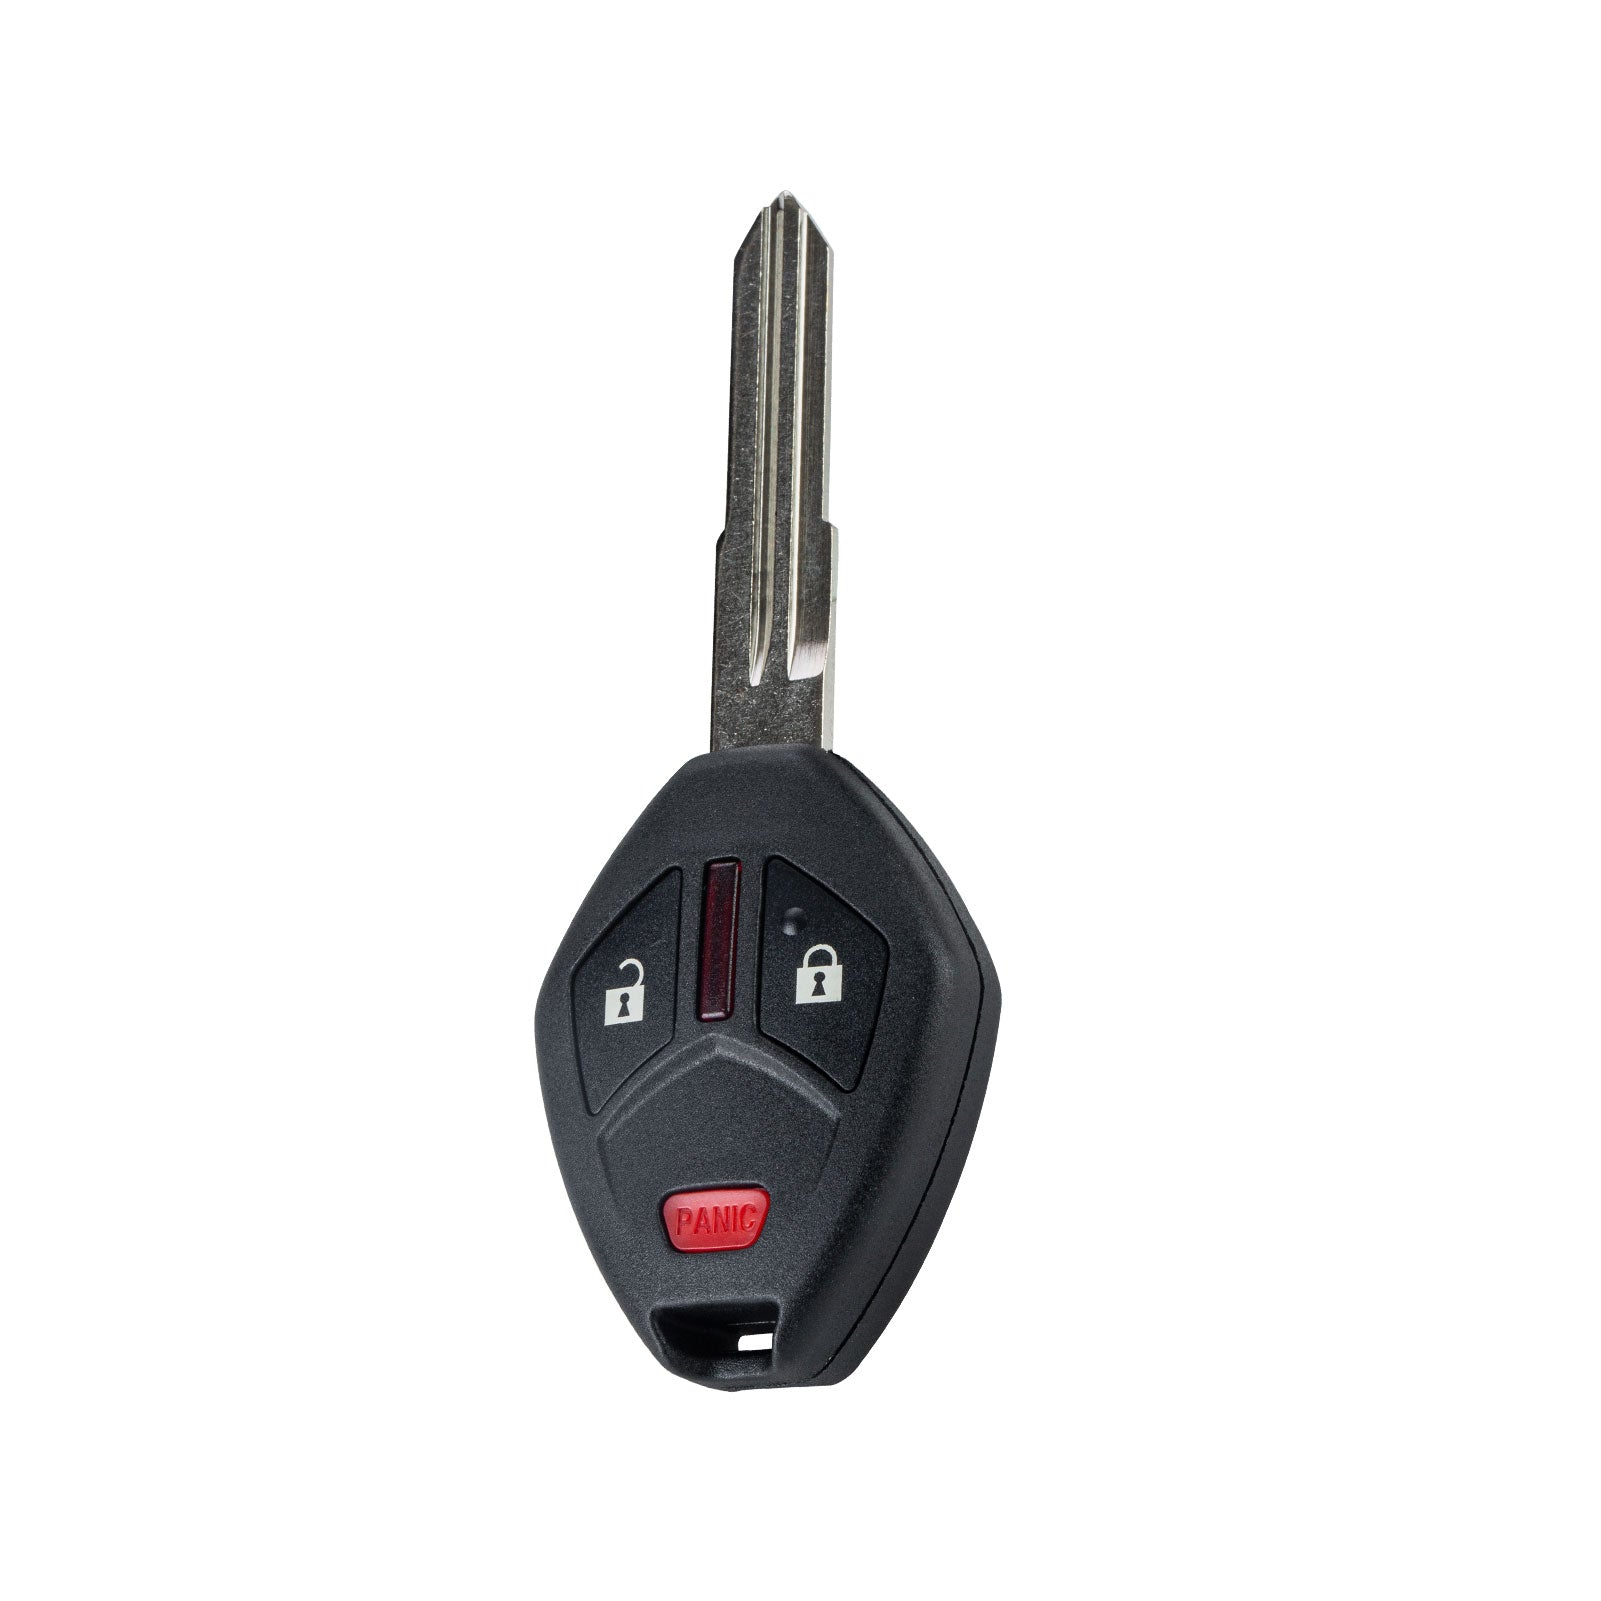 ID46 Car Key Fob Replacement for 2011-2014 I-MeiV 2007-2016 Outlander 2014-2016 Outlander Sport 315MHz OUCG8D-625M-A KR-M3SD